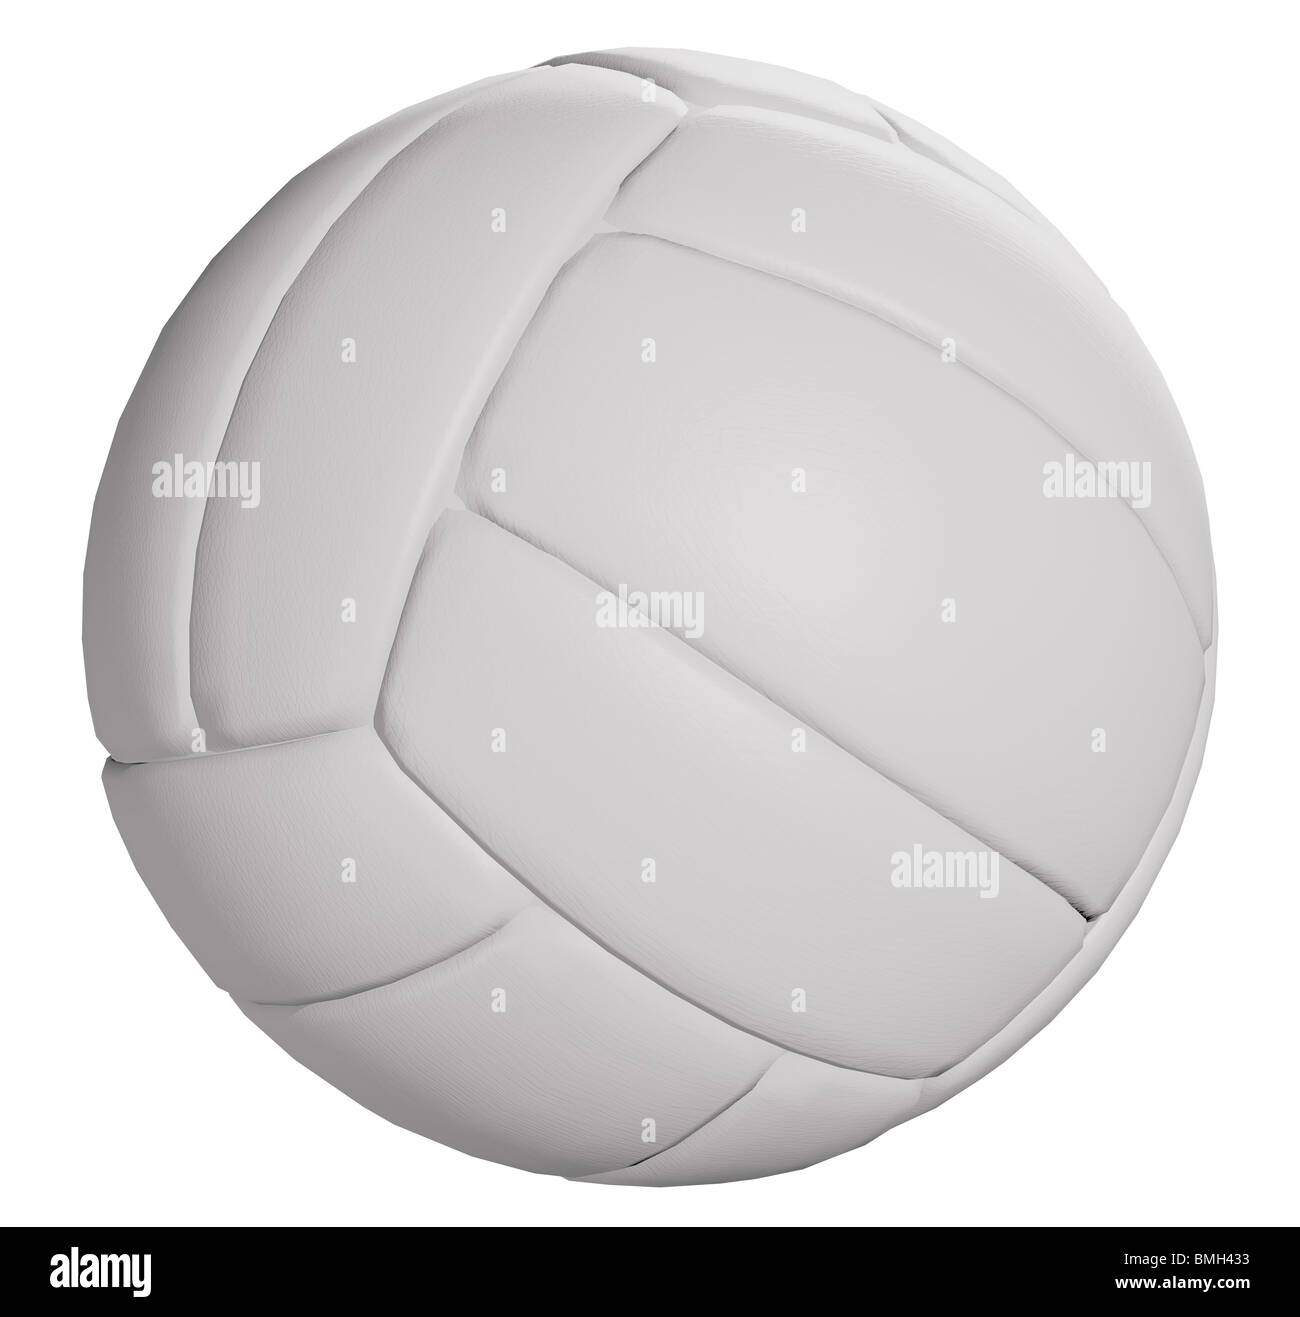 Volleyball ball isolated on white background with clipping path Stock ...